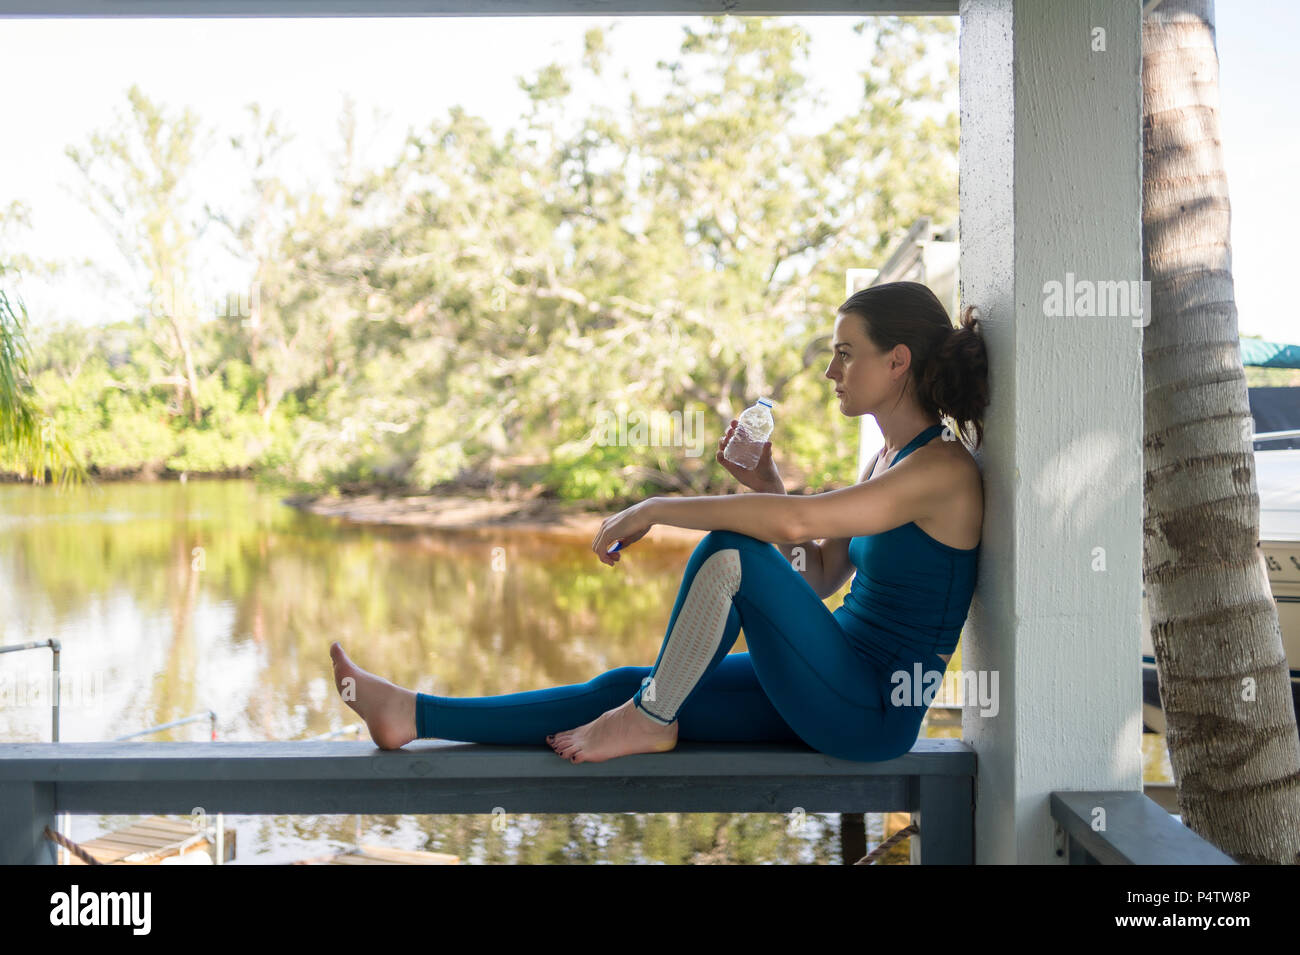 woman sitting resting and drinking water after exercise Stock Photo